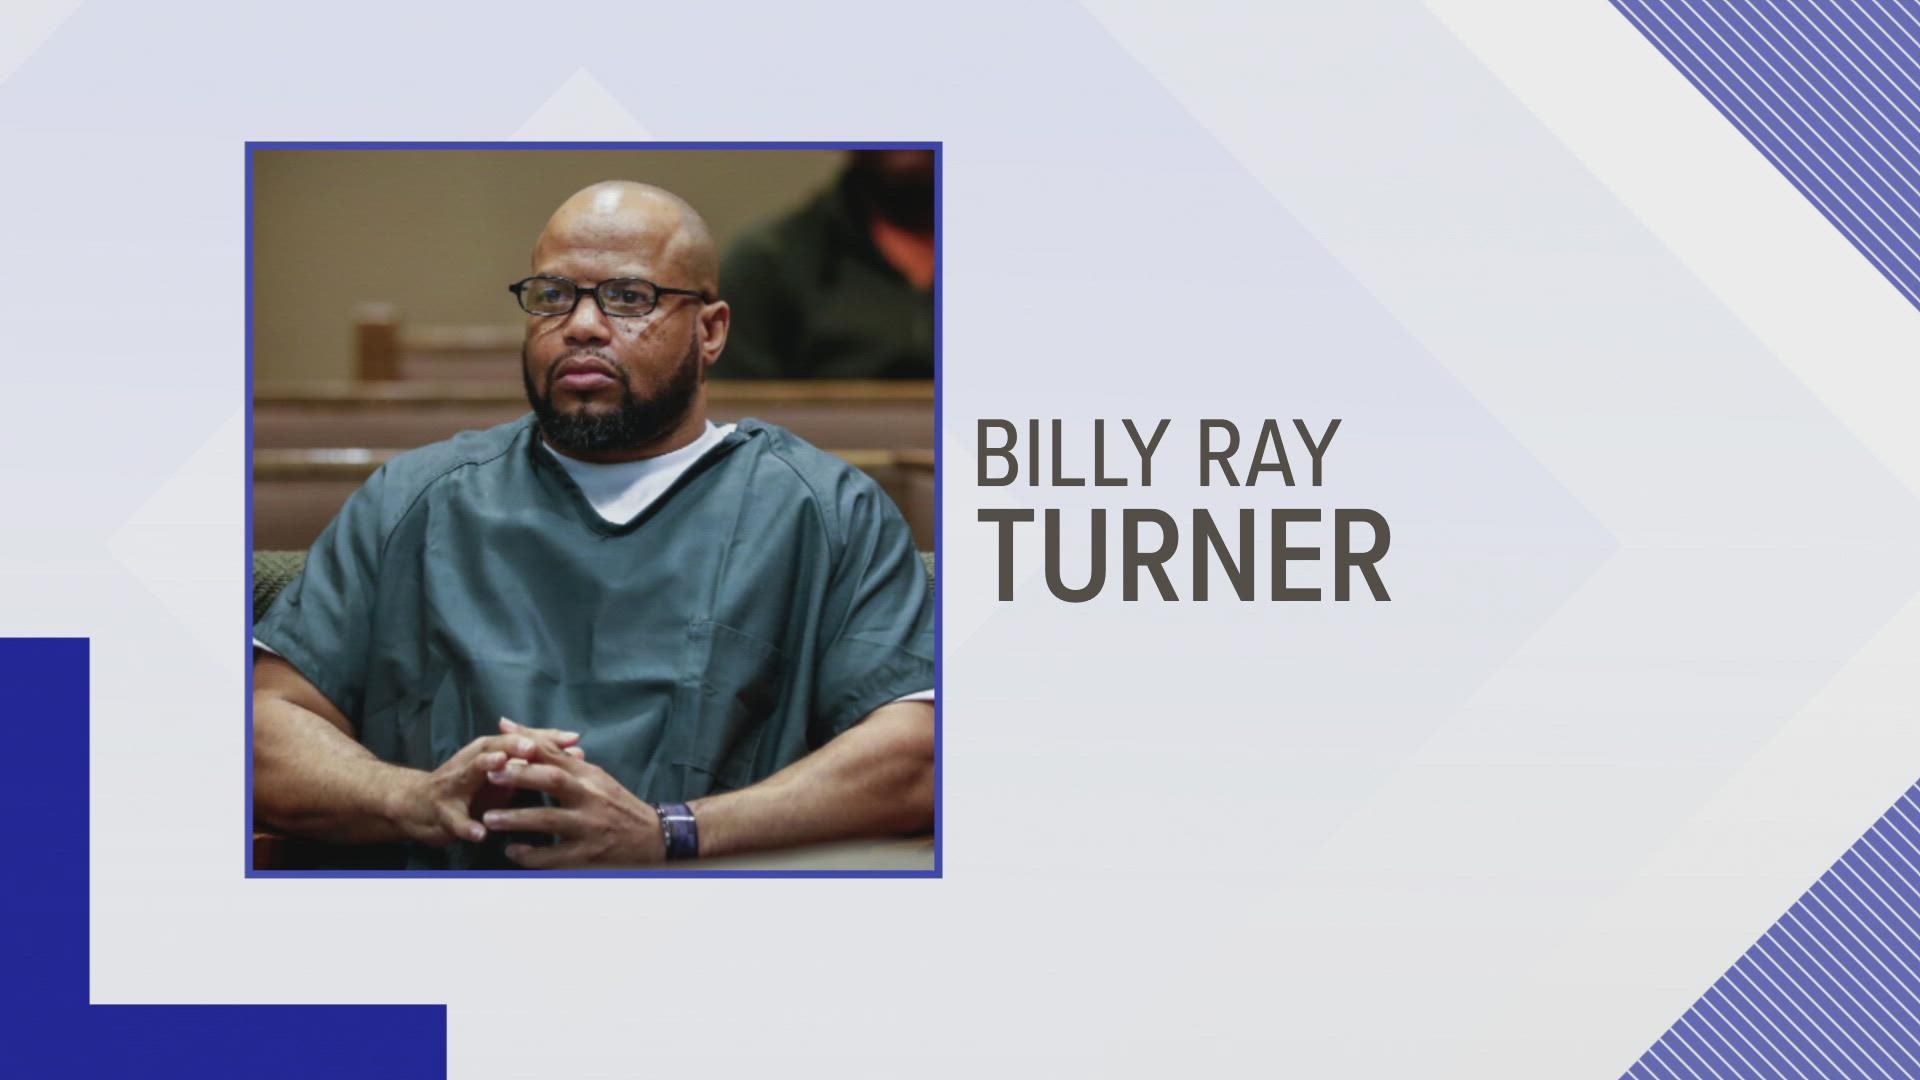 Opening statements began Tuesday morning in the trial of Billy Ray Turner, charged with killing former NBA player Lorenzen Wright.